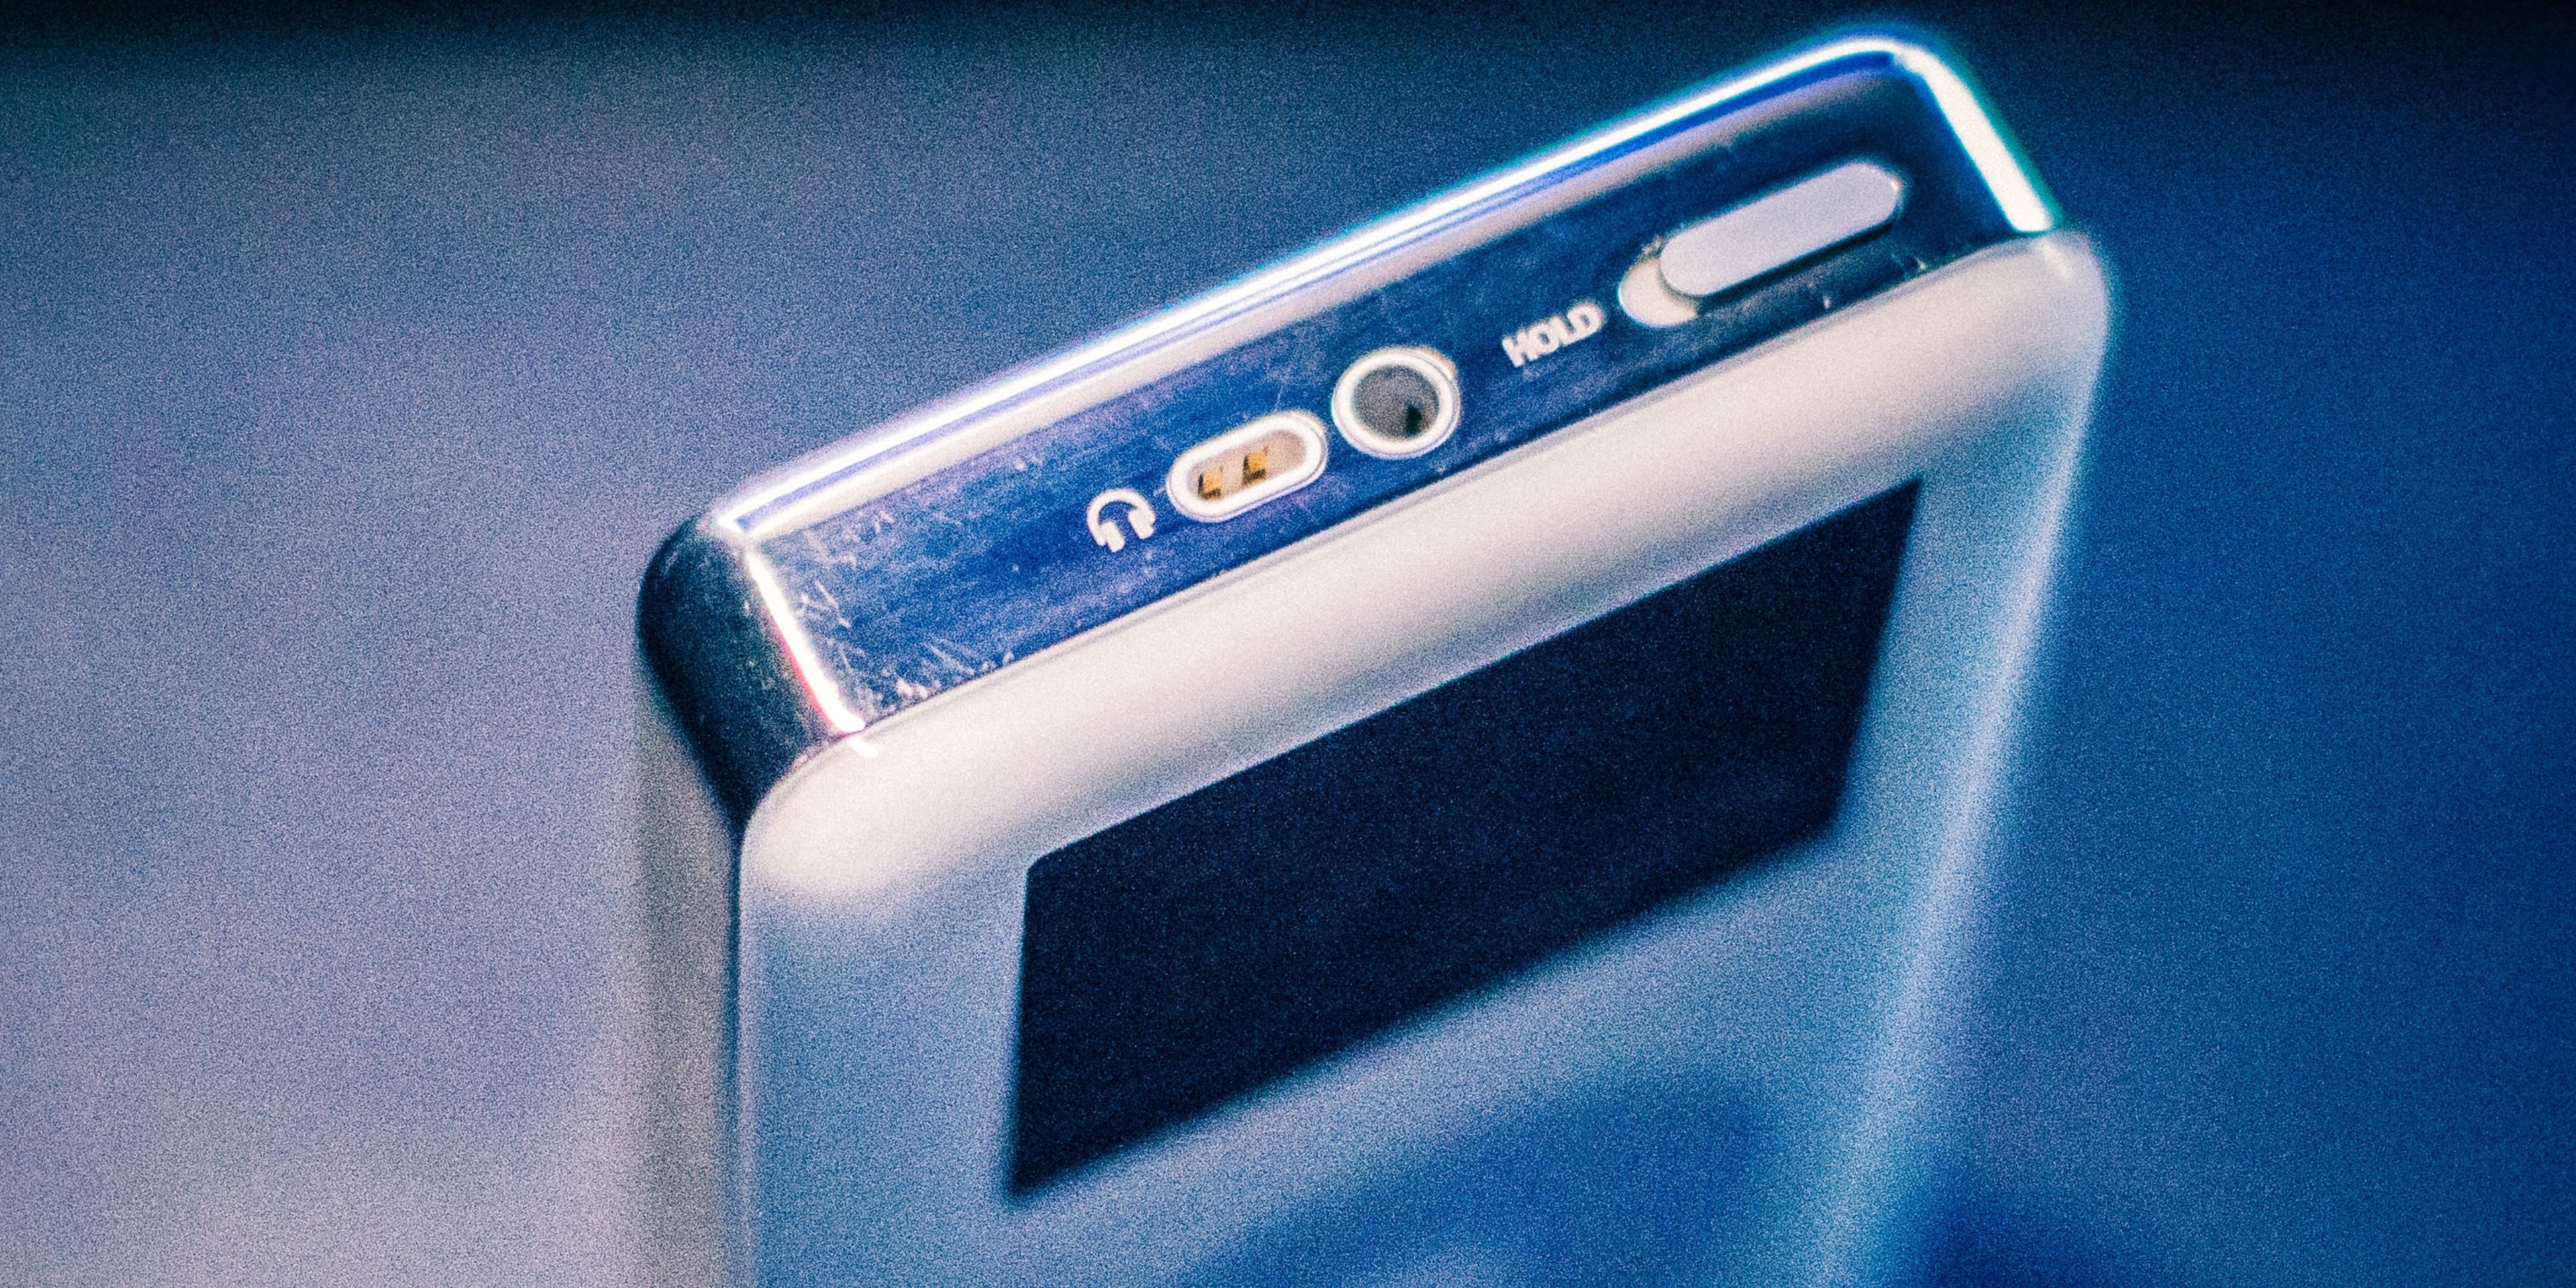 The iPod top showing the Hold switch and the headphone jack